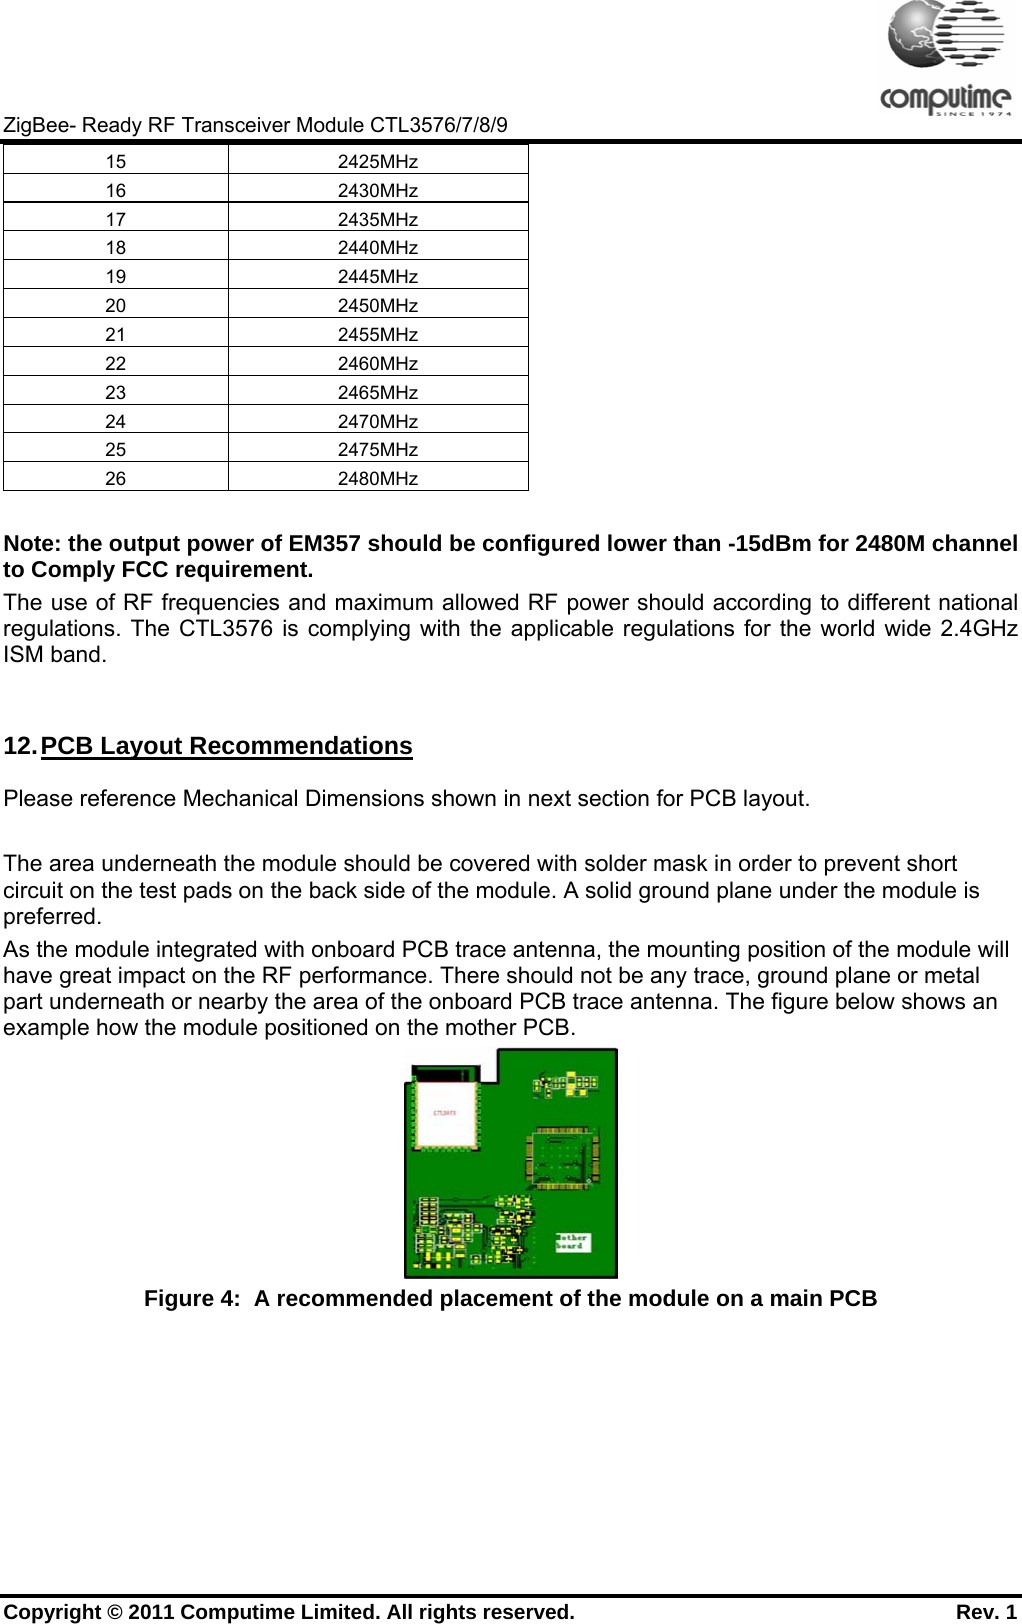     ZigBee- Ready RF Transceiver Module CTL3576/7/8/9 Copyright © 2011 Computime Limited. All rights reserved.                                                       Rev. 1 15 2425MHz 16 2430MHz 17 2435MHz 18 2440MHz 19 2445MHz 20 2450MHz 21 2455MHz 22 2460MHz 23 2465MHz 24 2470MHz 25 2475MHz 26 2480MHz  Note: the output power of EM357 should be configured lower than -15dBm for 2480M channel to Comply FCC requirement. The use of RF frequencies and maximum allowed RF power should according to different national regulations. The CTL3576 is complying with the applicable regulations for the world wide 2.4GHz ISM band.  12. PCB Layout Recommendations Please reference Mechanical Dimensions shown in next section for PCB layout.  The area underneath the module should be covered with solder mask in order to prevent short circuit on the test pads on the back side of the module. A solid ground plane under the module is preferred.  As the module integrated with onboard PCB trace antenna, the mounting position of the module will have great impact on the RF performance. There should not be any trace, ground plane or metal part underneath or nearby the area of the onboard PCB trace antenna. The figure below shows an example how the module positioned on the mother PCB.   Figure 4:  A recommended placement of the module on a main PCB  